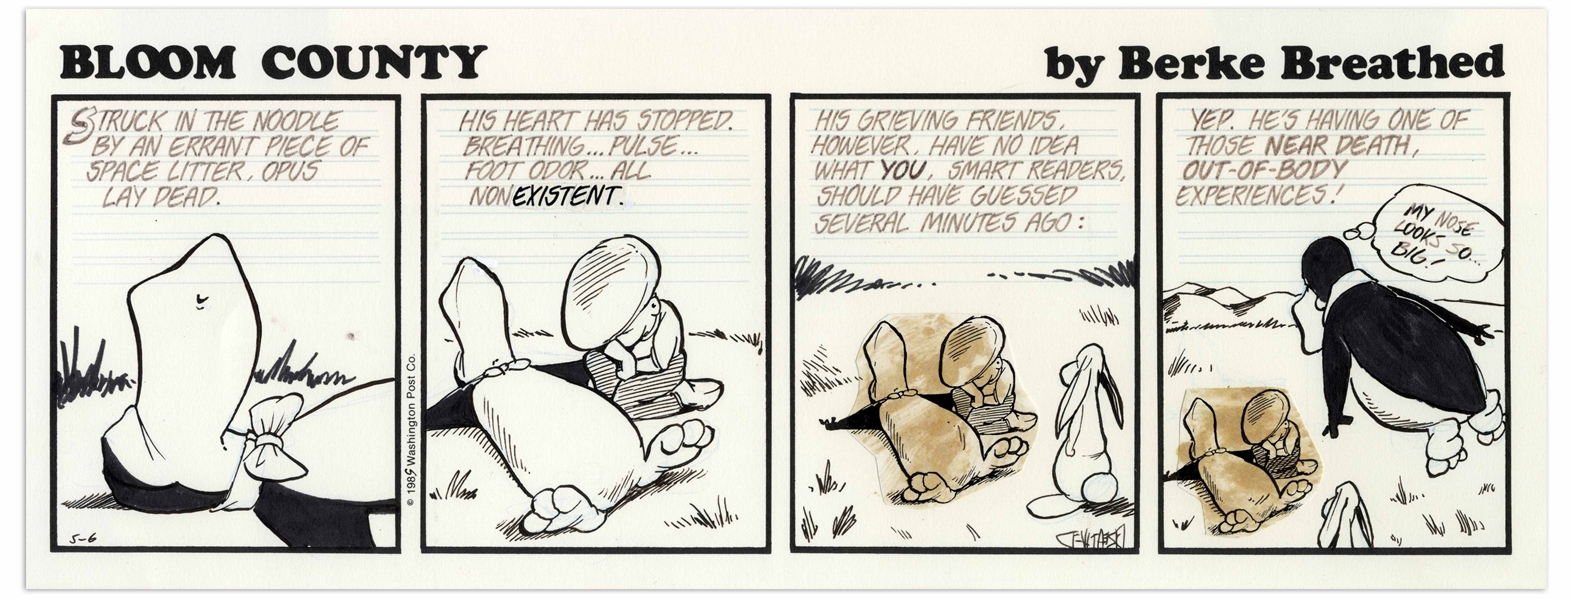 Berke Breathed Original Hand-Drawn Comic Strip for ''Bloom County'' -- Opus Has a Near Death Experience